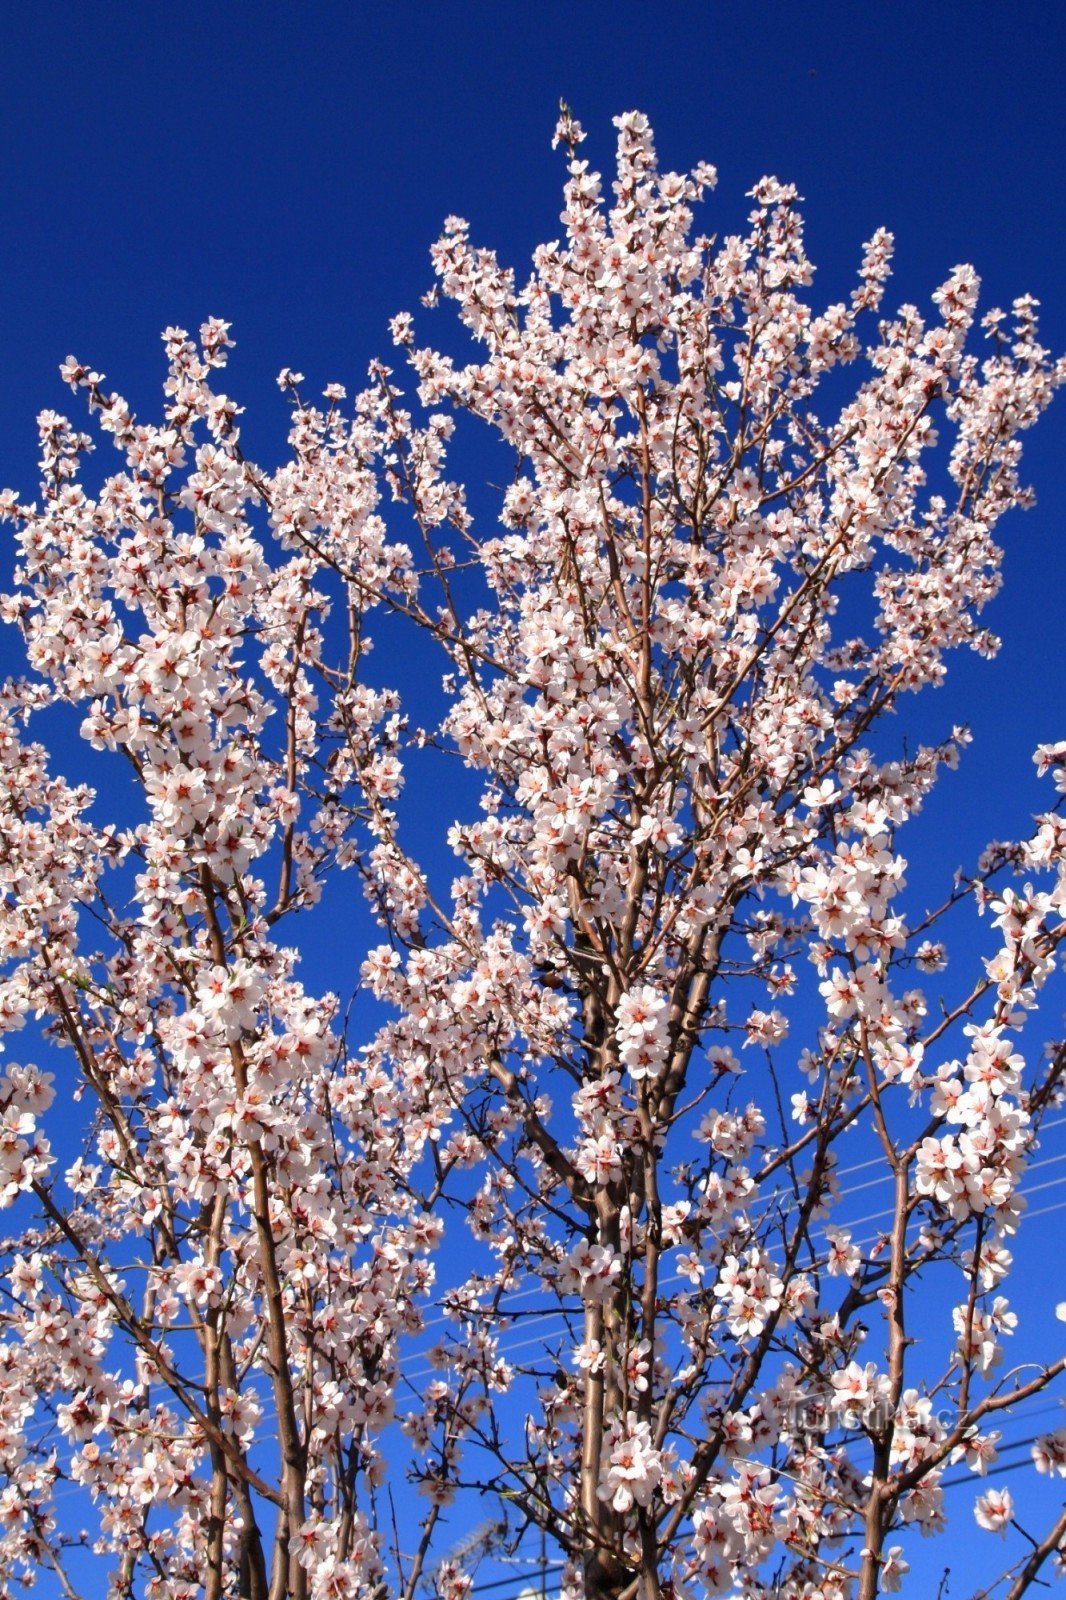 Almond crown in full bloom - March 25